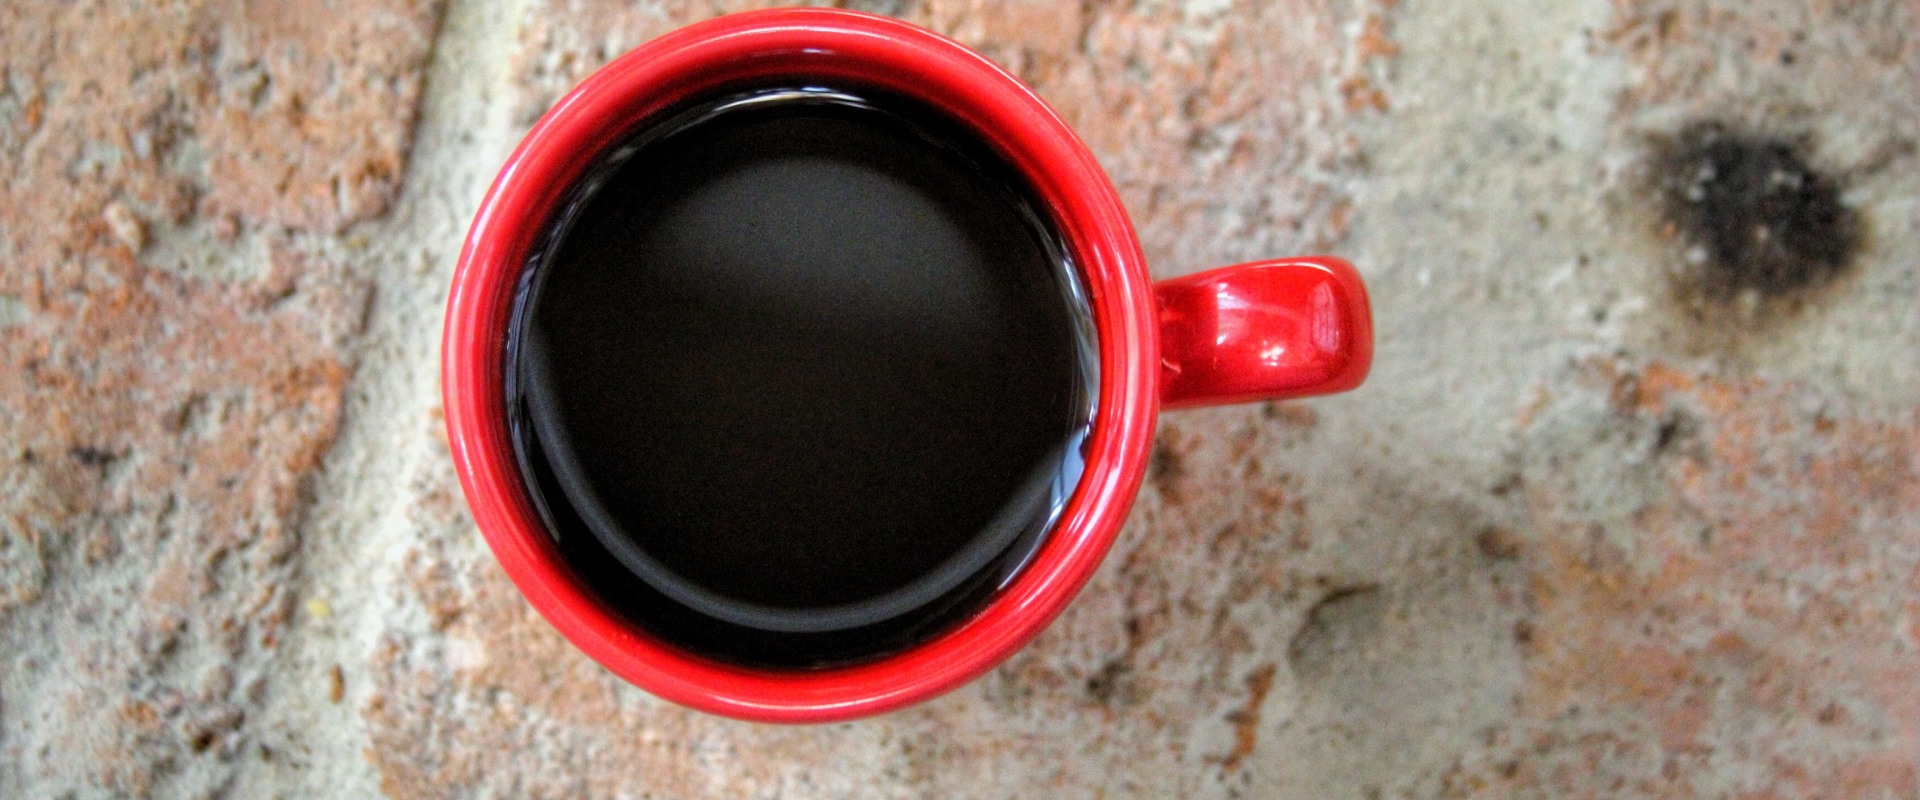 What Folgers Coffee Has the Most Caffeine?